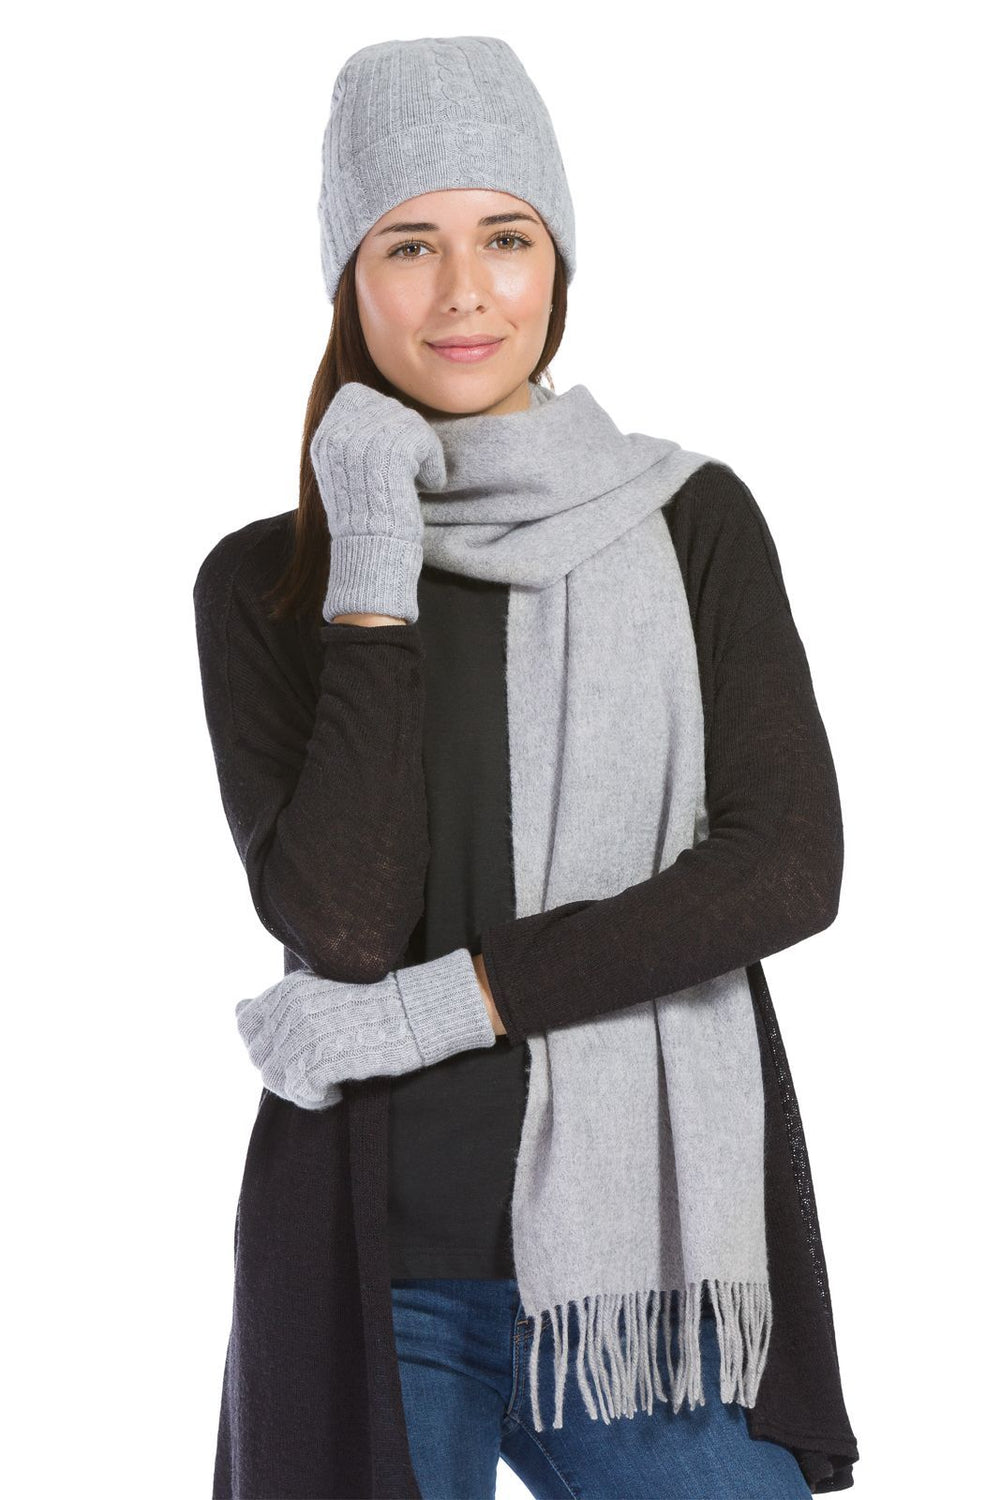 Women's Premium Cashmere Hat, Gloves & Scarf Gift Set | Fishers Finery